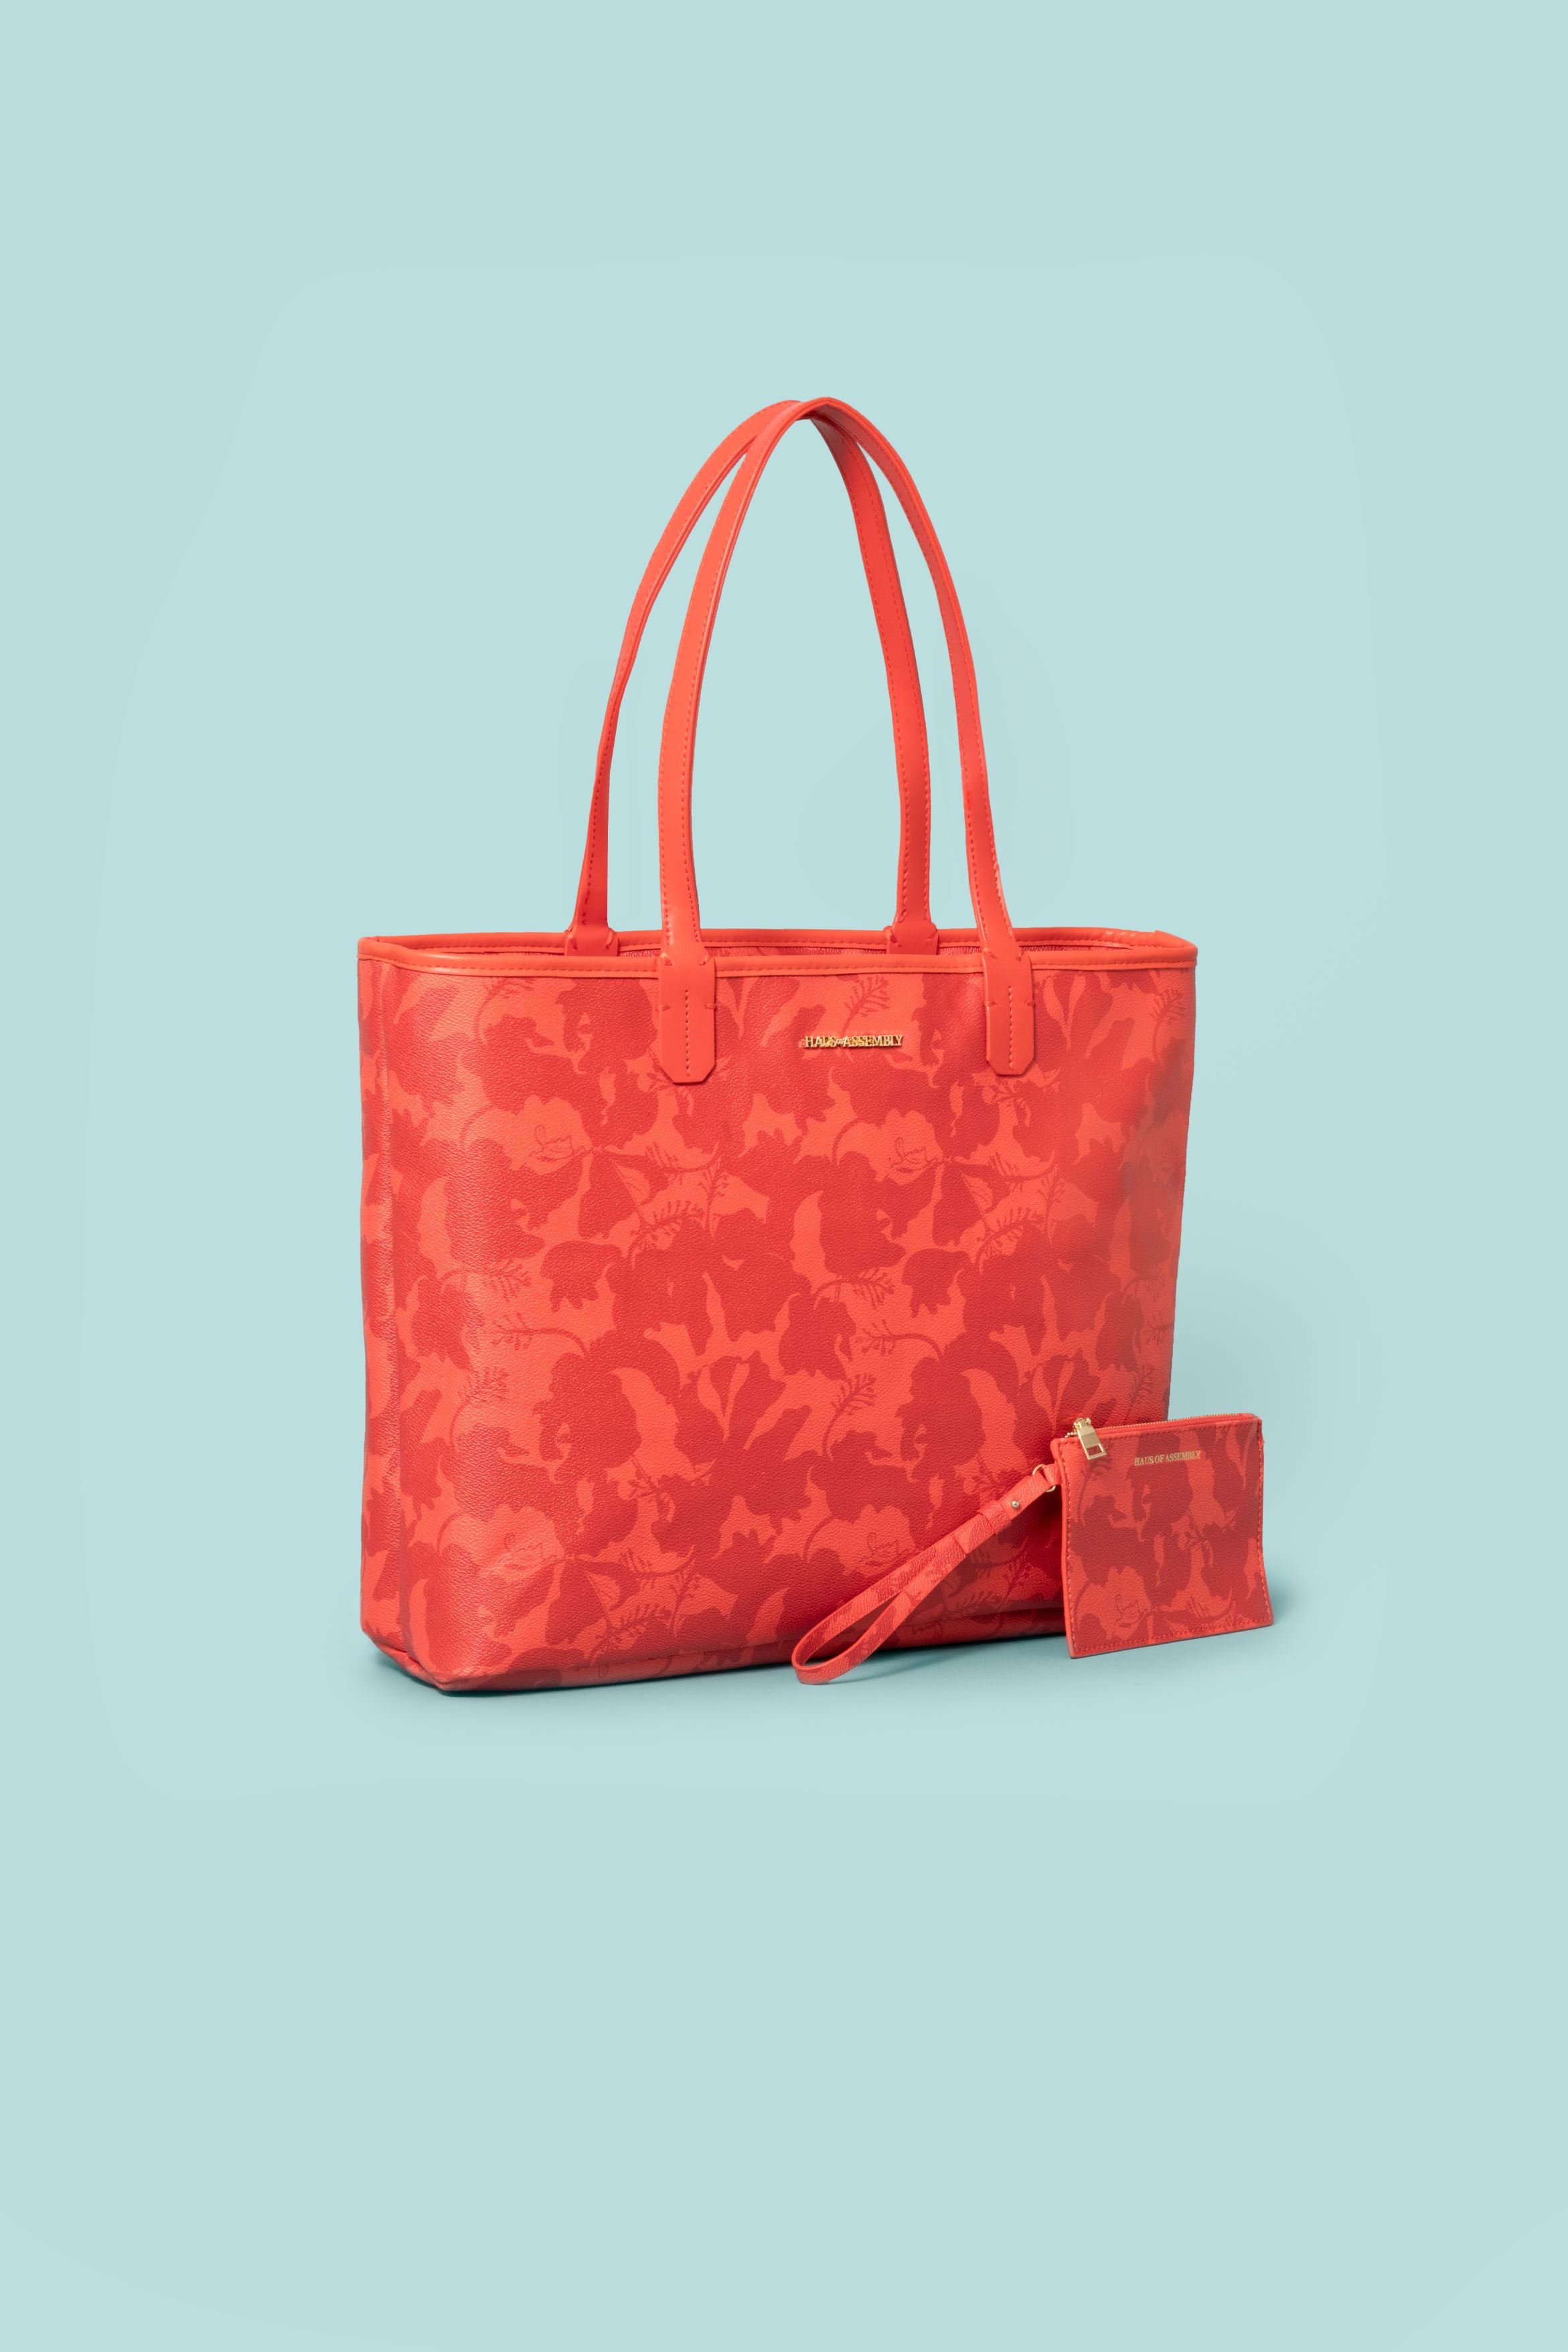 AM TOTE- Valentine's Day Collection